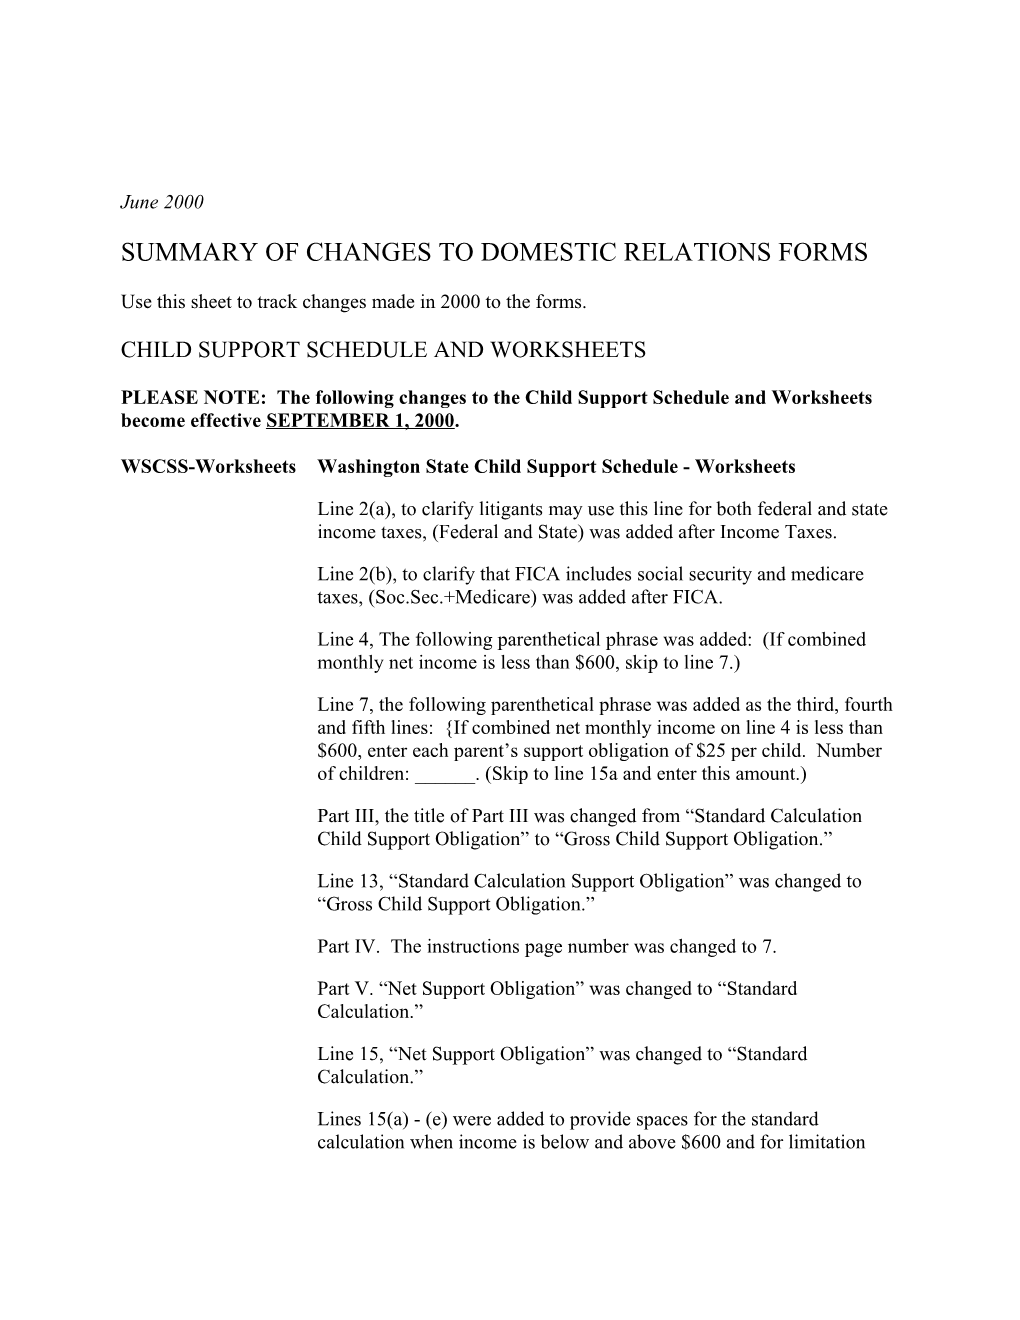 Summary of Changes to Domestic Relations Forms